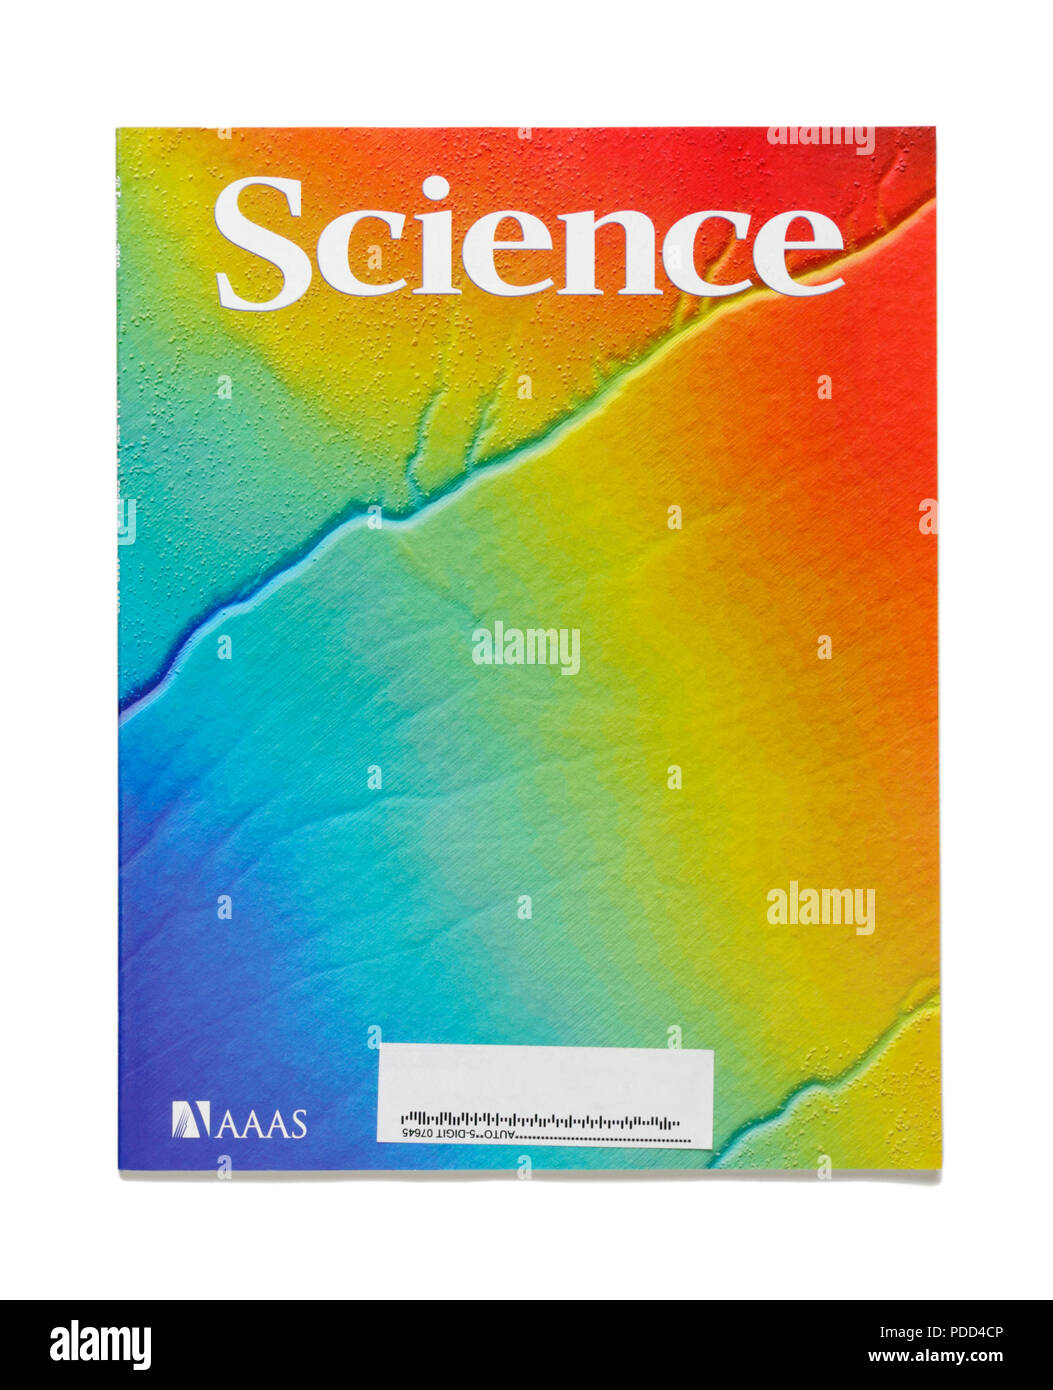 Peer reviewed science research journals. This journal, Science, is  published by the American Association for the Advancement of Science (AAAS  Stock Photo - Alamy